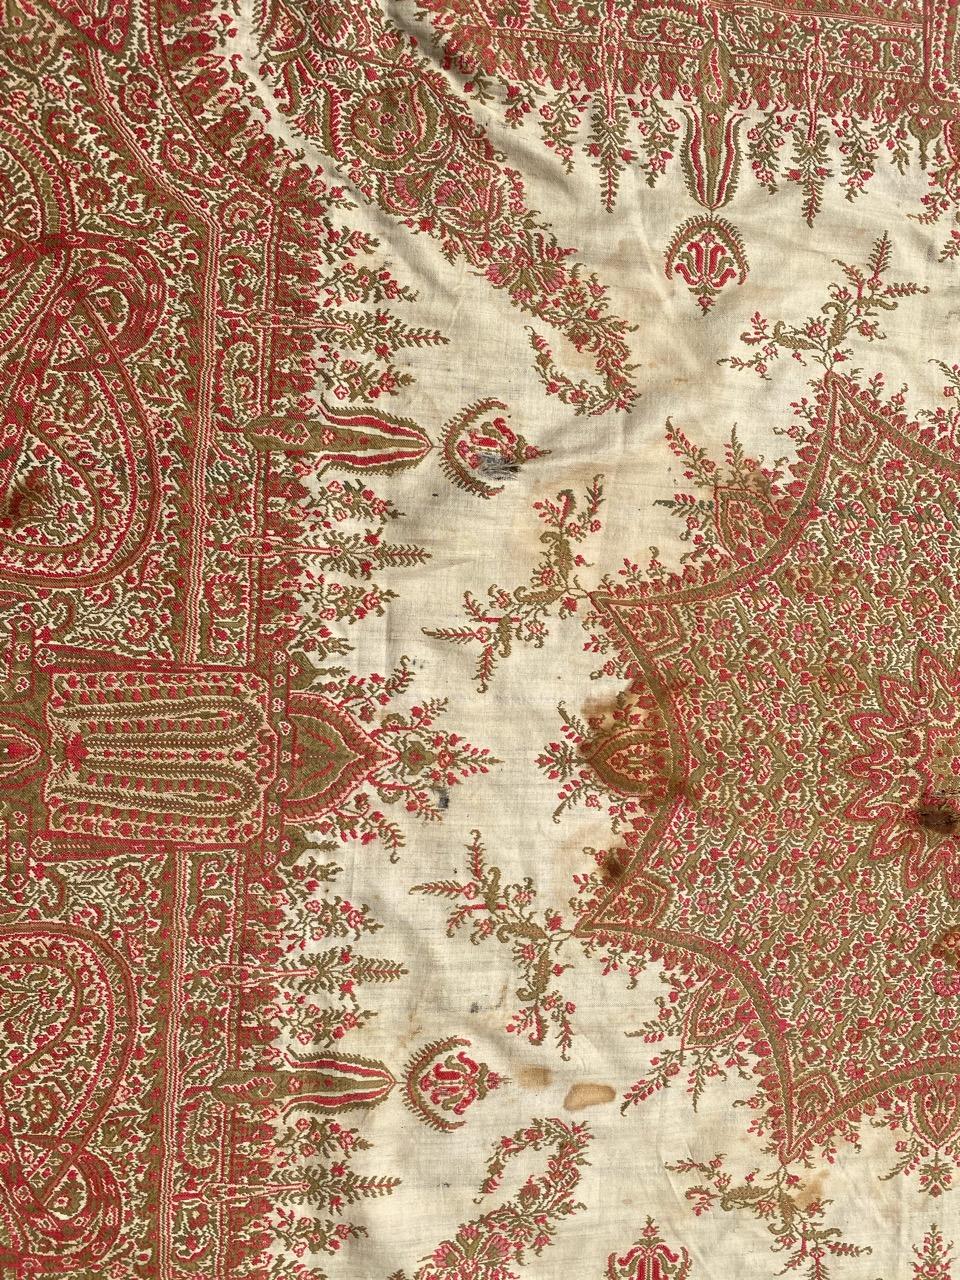 Very beautiful late 19th century French Kashmir shawl with beautiful floral design and white field color, mechanical Jaquar manufacturing woven with wool on wool.

✨✨✨
